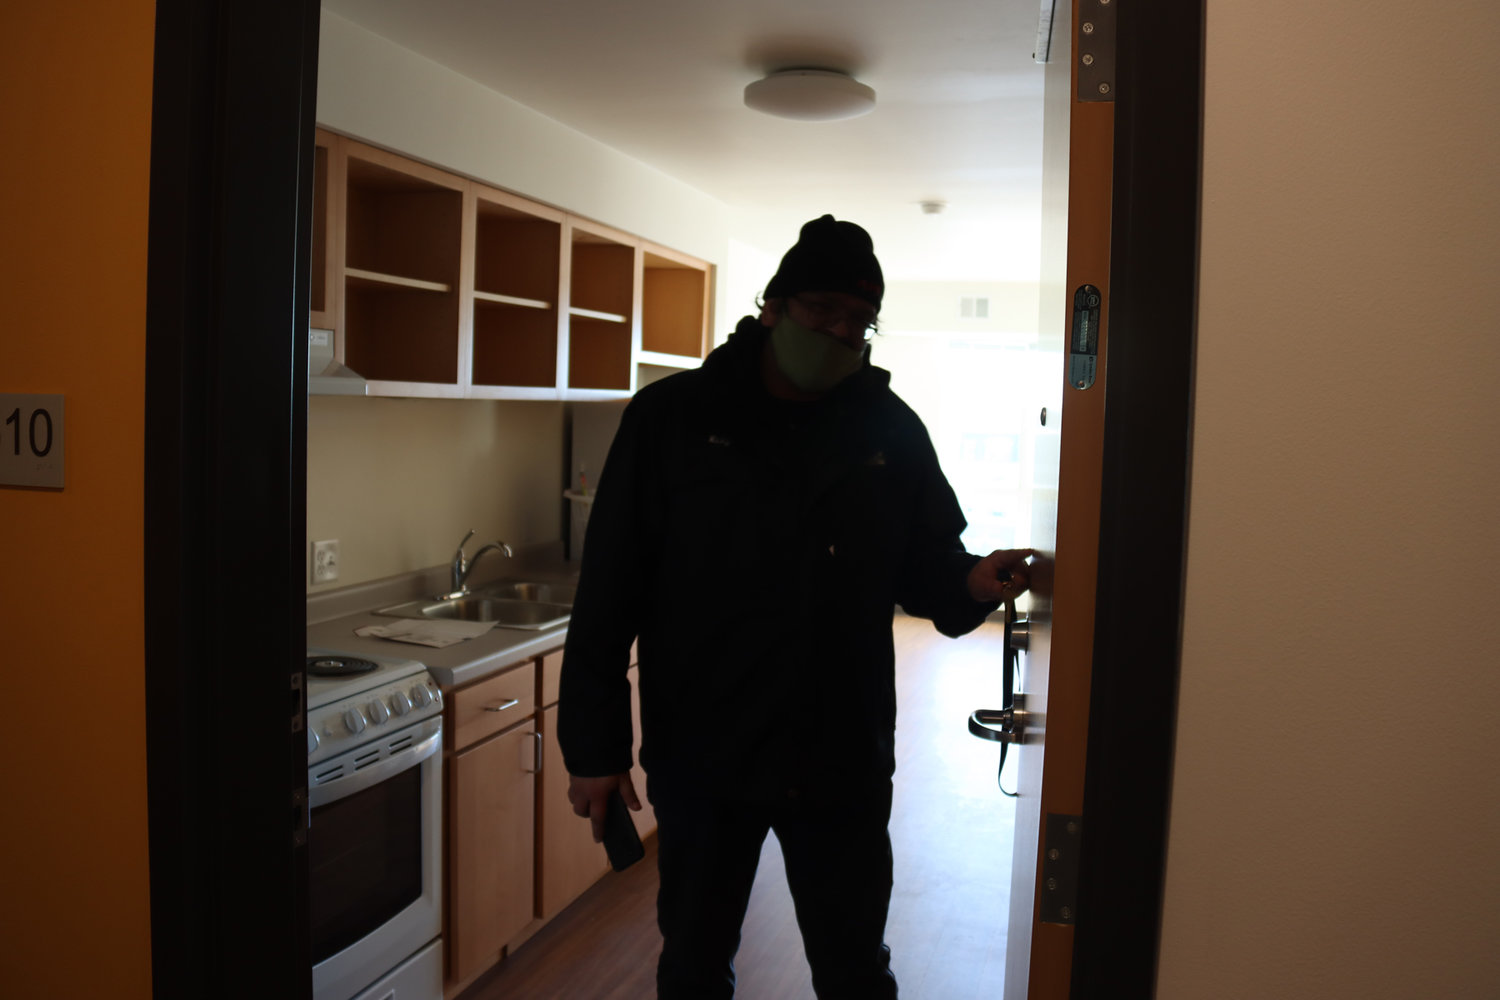 Ricky Rains signed the lease agreement on Jan. 19, and planned to start moving stuff in the next day before his weekend night shifts began. His favorite things about his new apartment? The large walk-in closet and sliding barn door.